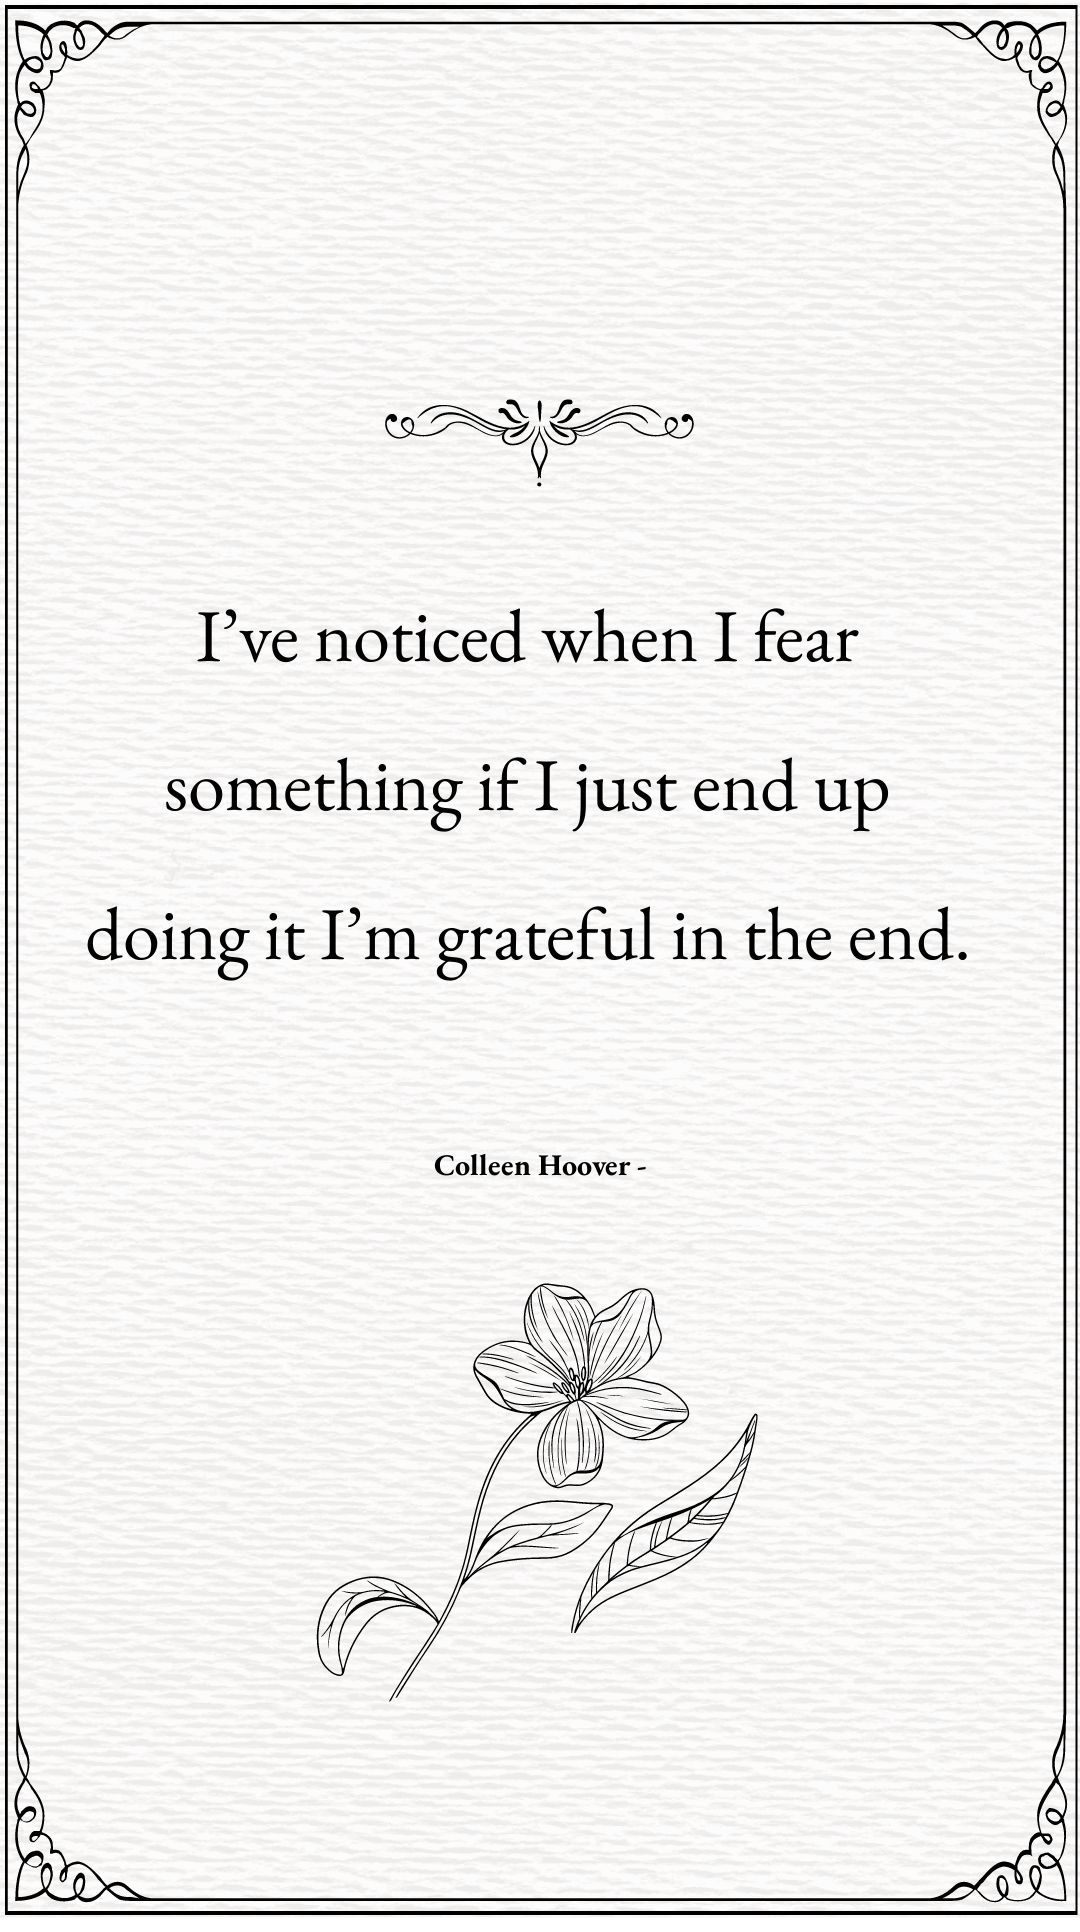 Colleen Hoover - I’ve noticed when I fear something if I just end up doing it I’m grateful in the end.